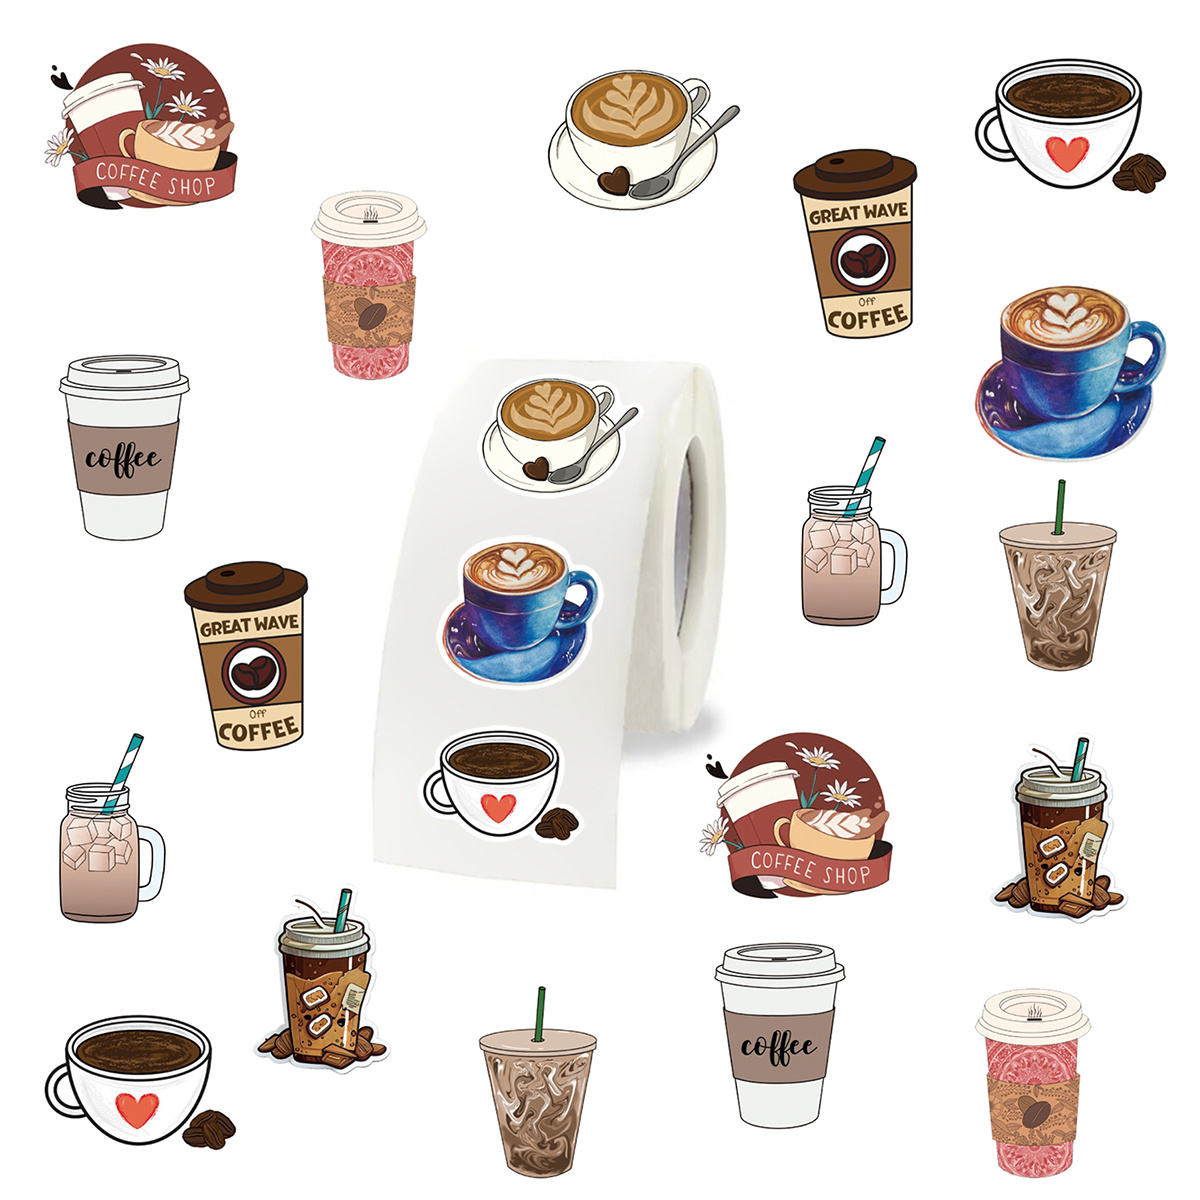 

500pcs Coffee Stickers Roll Drink Coffee Stickers For Laptop, Bumper, Water Bottles, Computer, Phone, Hard Hat, Car Stickers And Decals For Teens Adults (1 Inch Labels/ 10 Patterns )